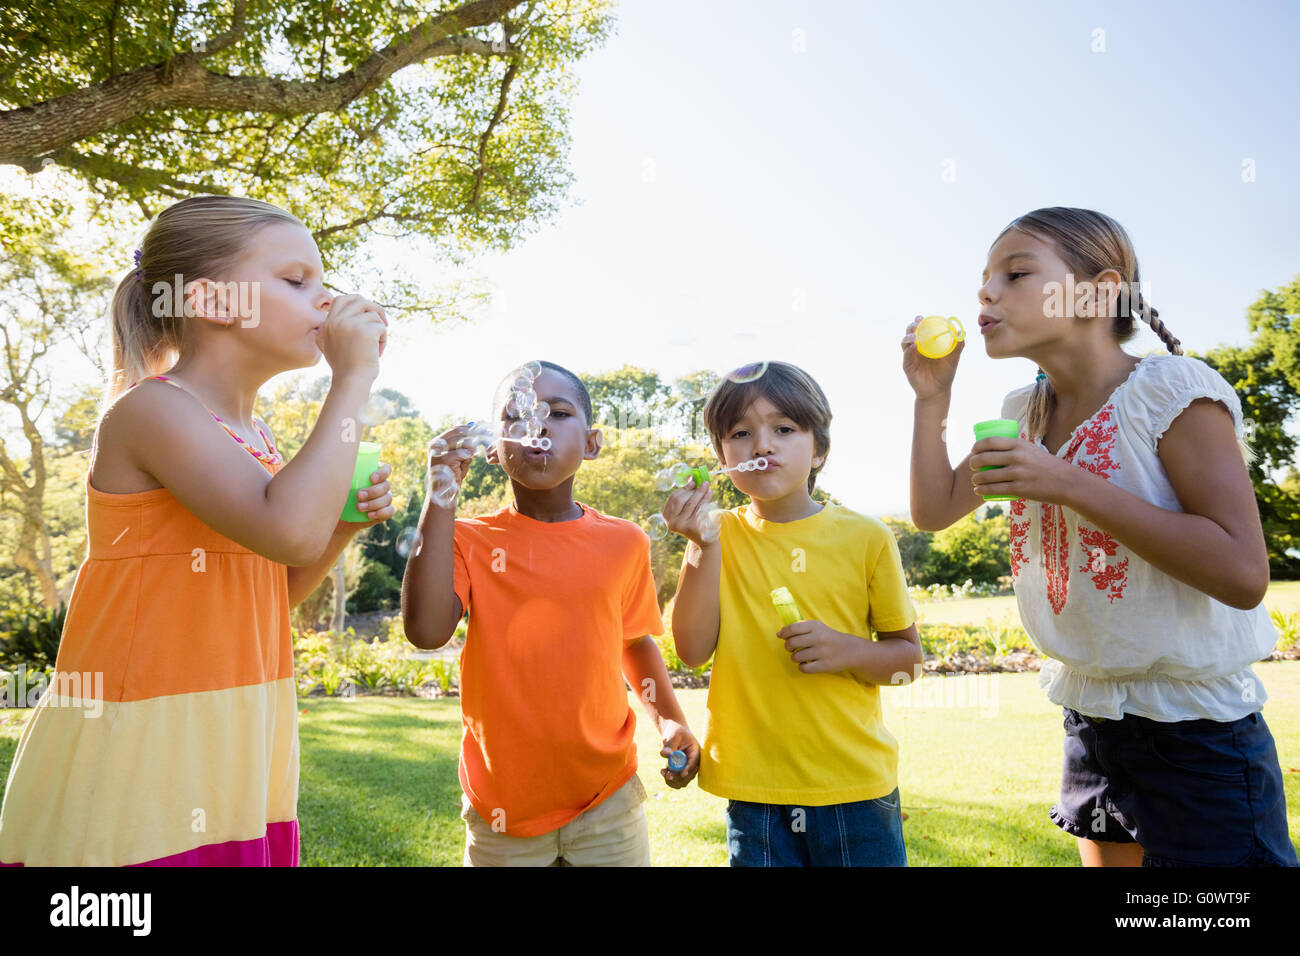 Children playing with bubble wand Stock Photo